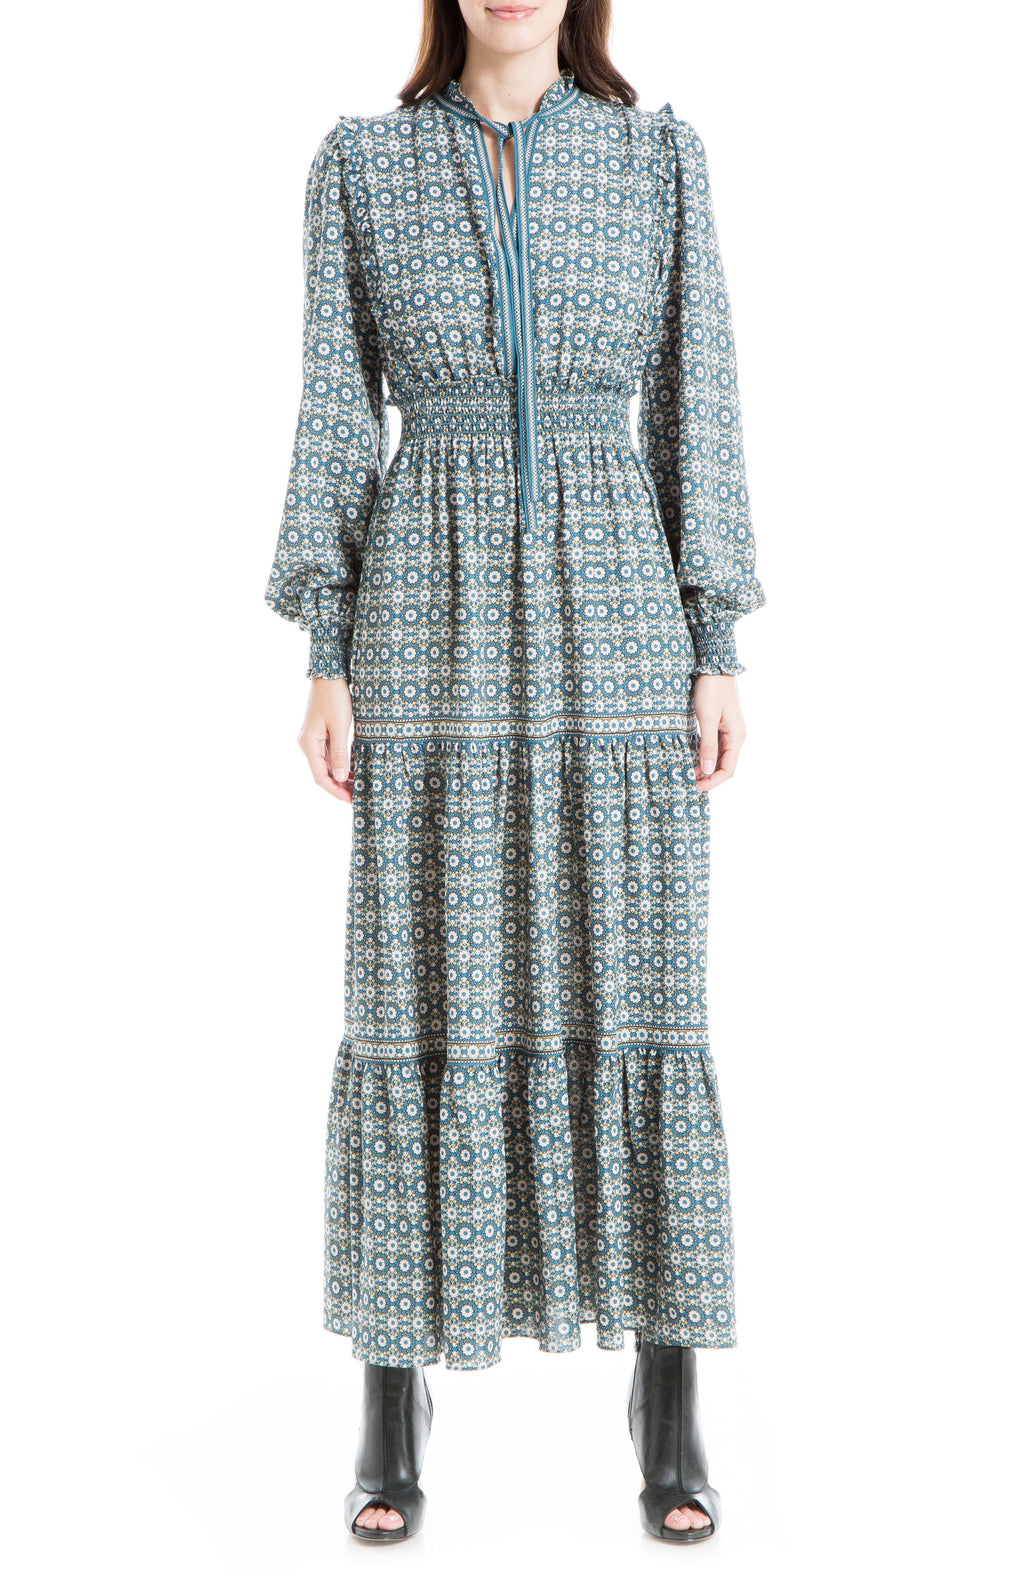 MAX STUDIO Elbow Sleeve Tier Maxi Dress, Main, color, TEAL GRAPHIC SUNFLOWER